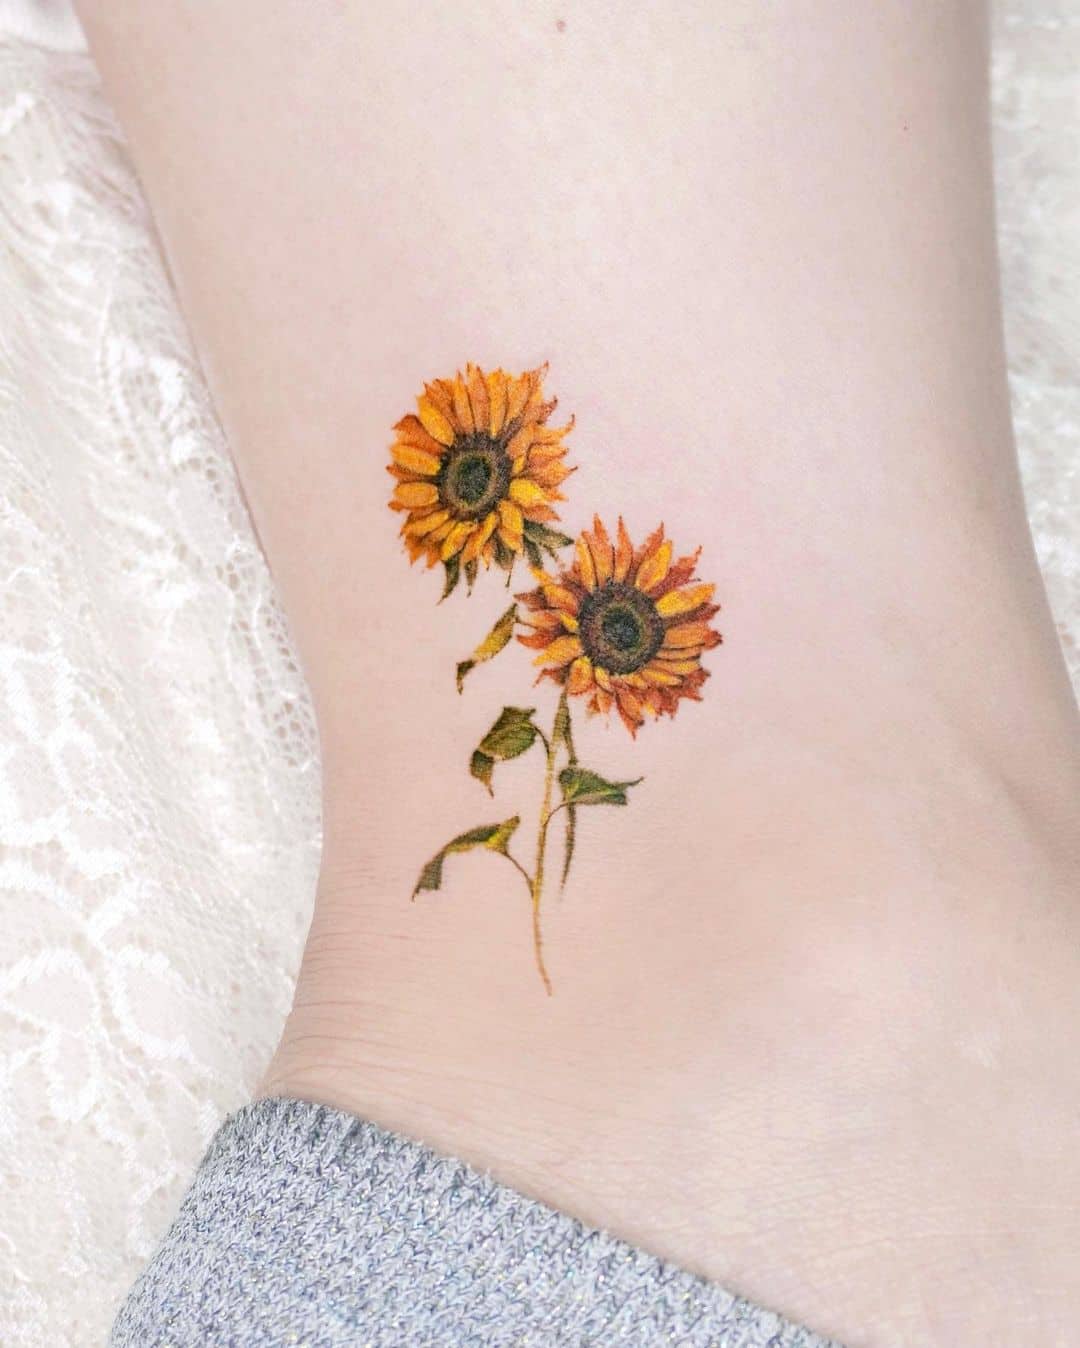 Sunflower tattoo: meaning and top 50 designs - Legit.ng